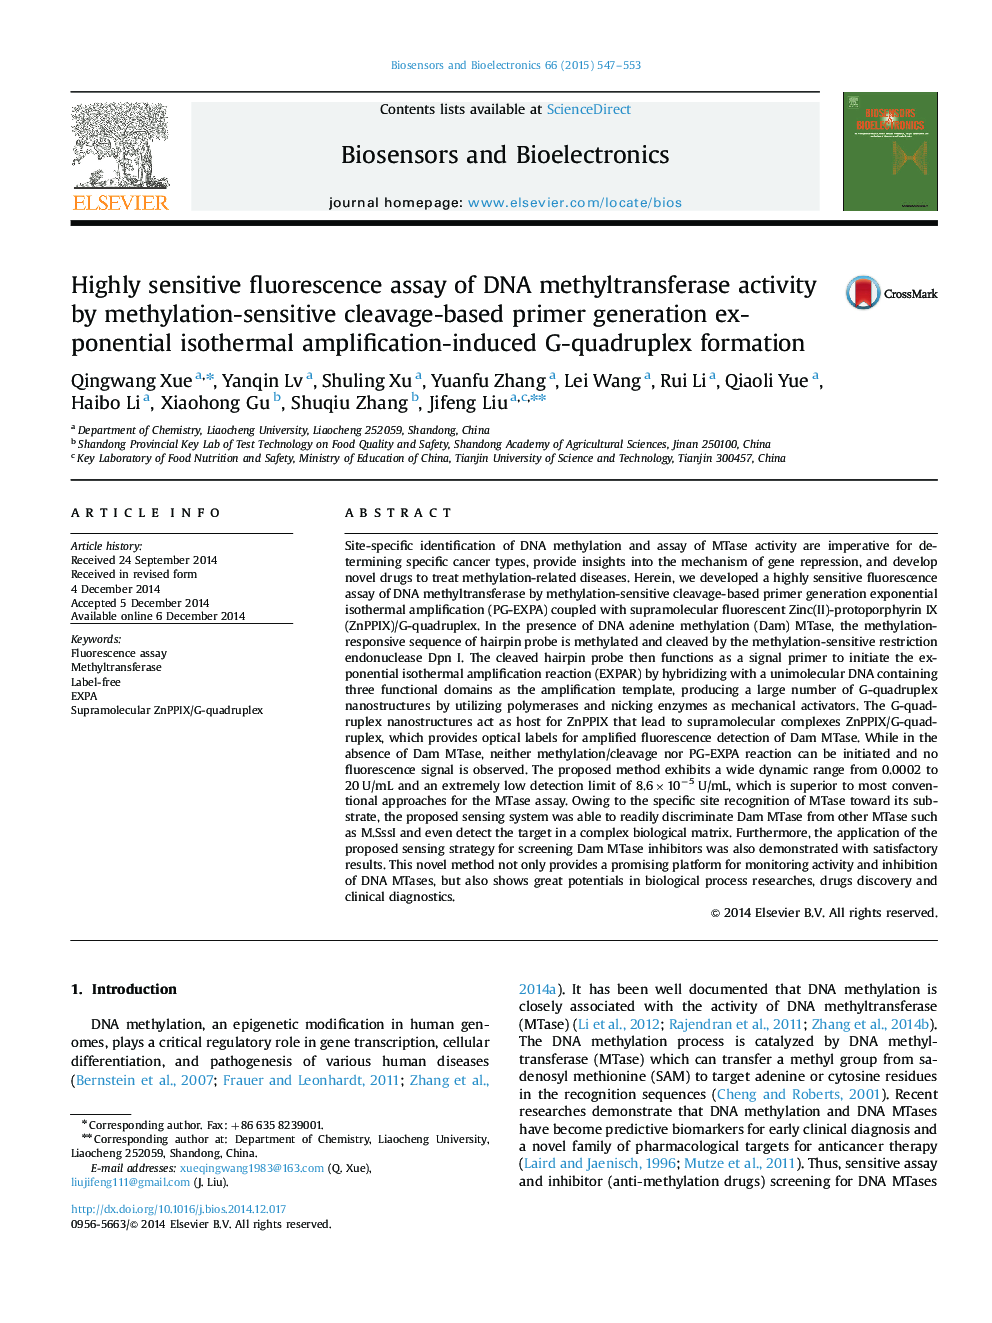 Highly sensitive fluorescence assay of DNA methyltransferase activity by methylation-sensitive cleavage-based primer generation exponential isothermal amplification-induced G-quadruplex formation